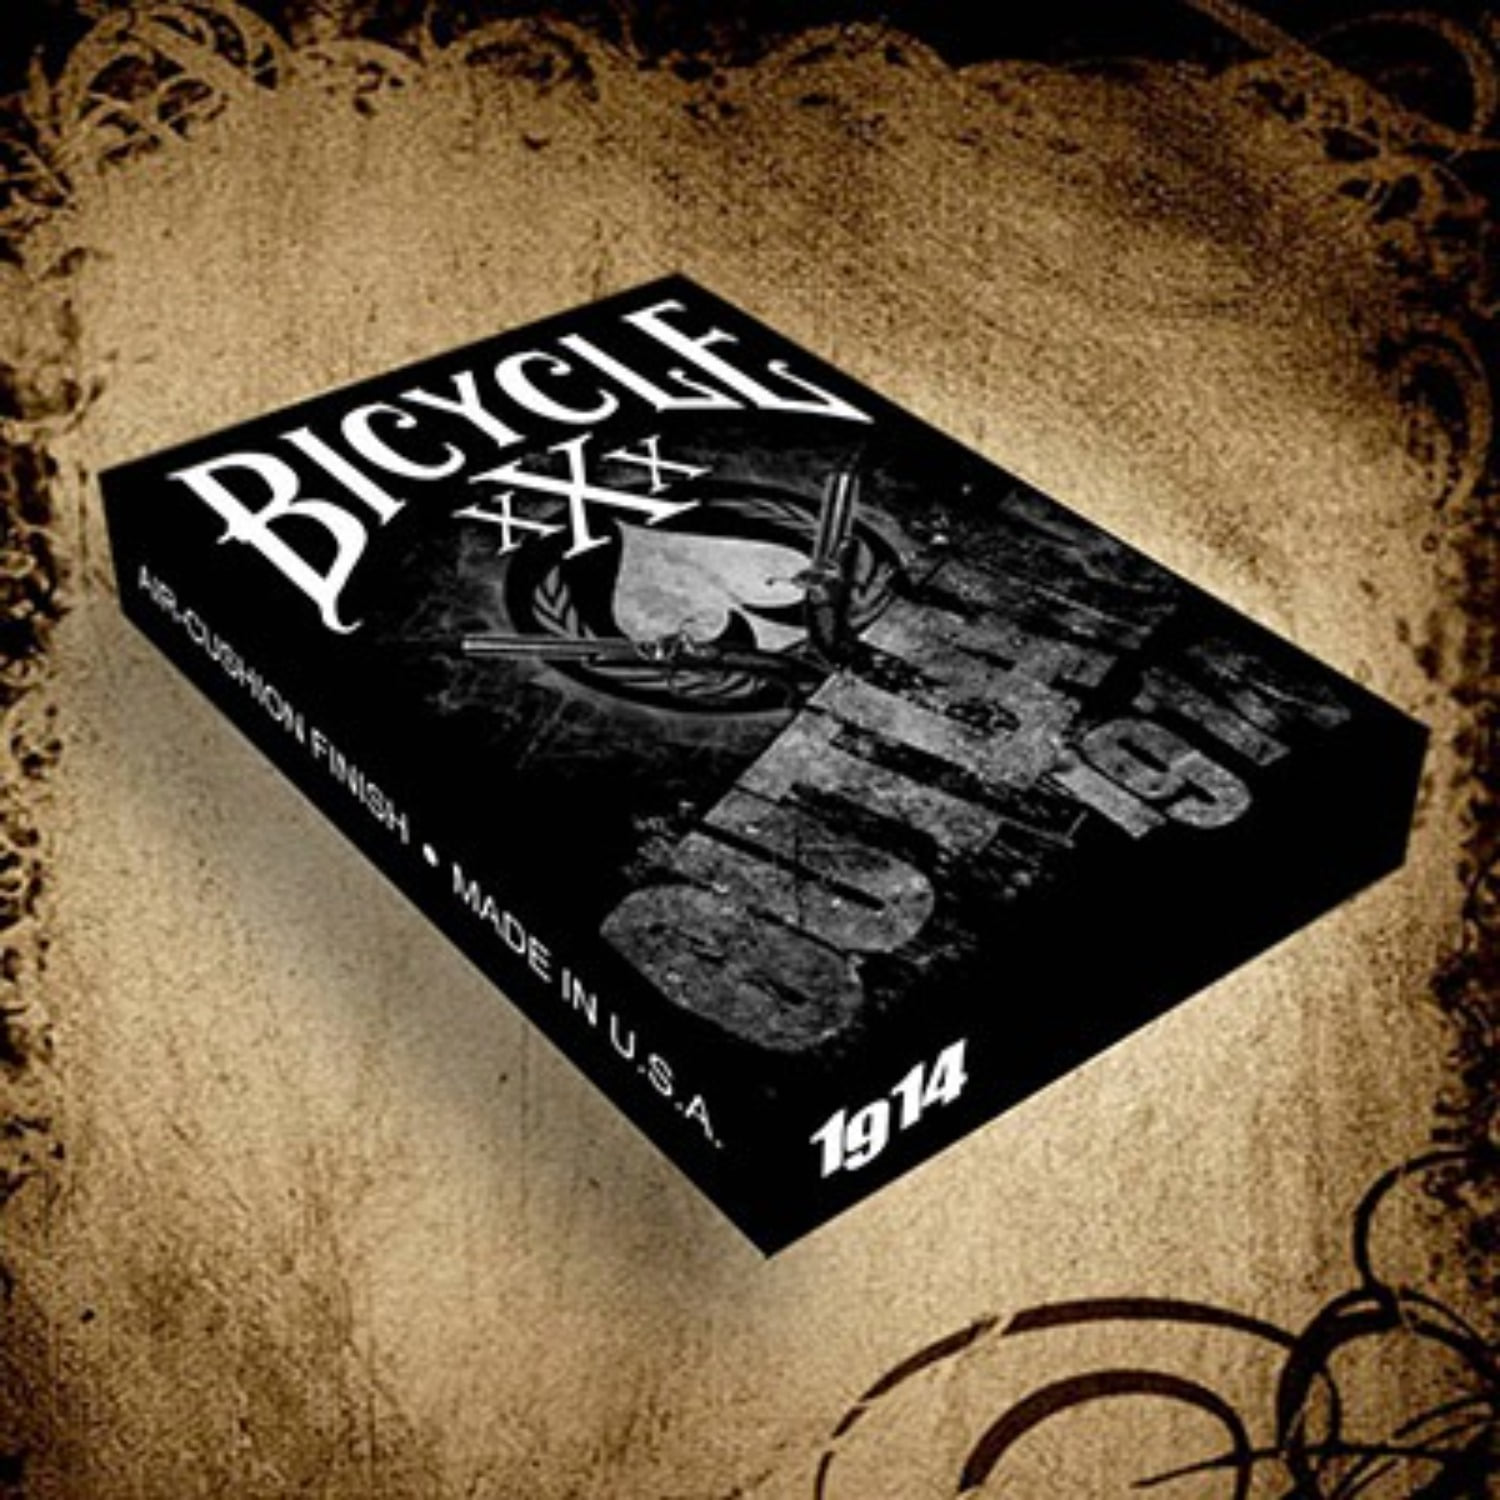 CA20 Outlaw Bicycle Deck by US Playing Card